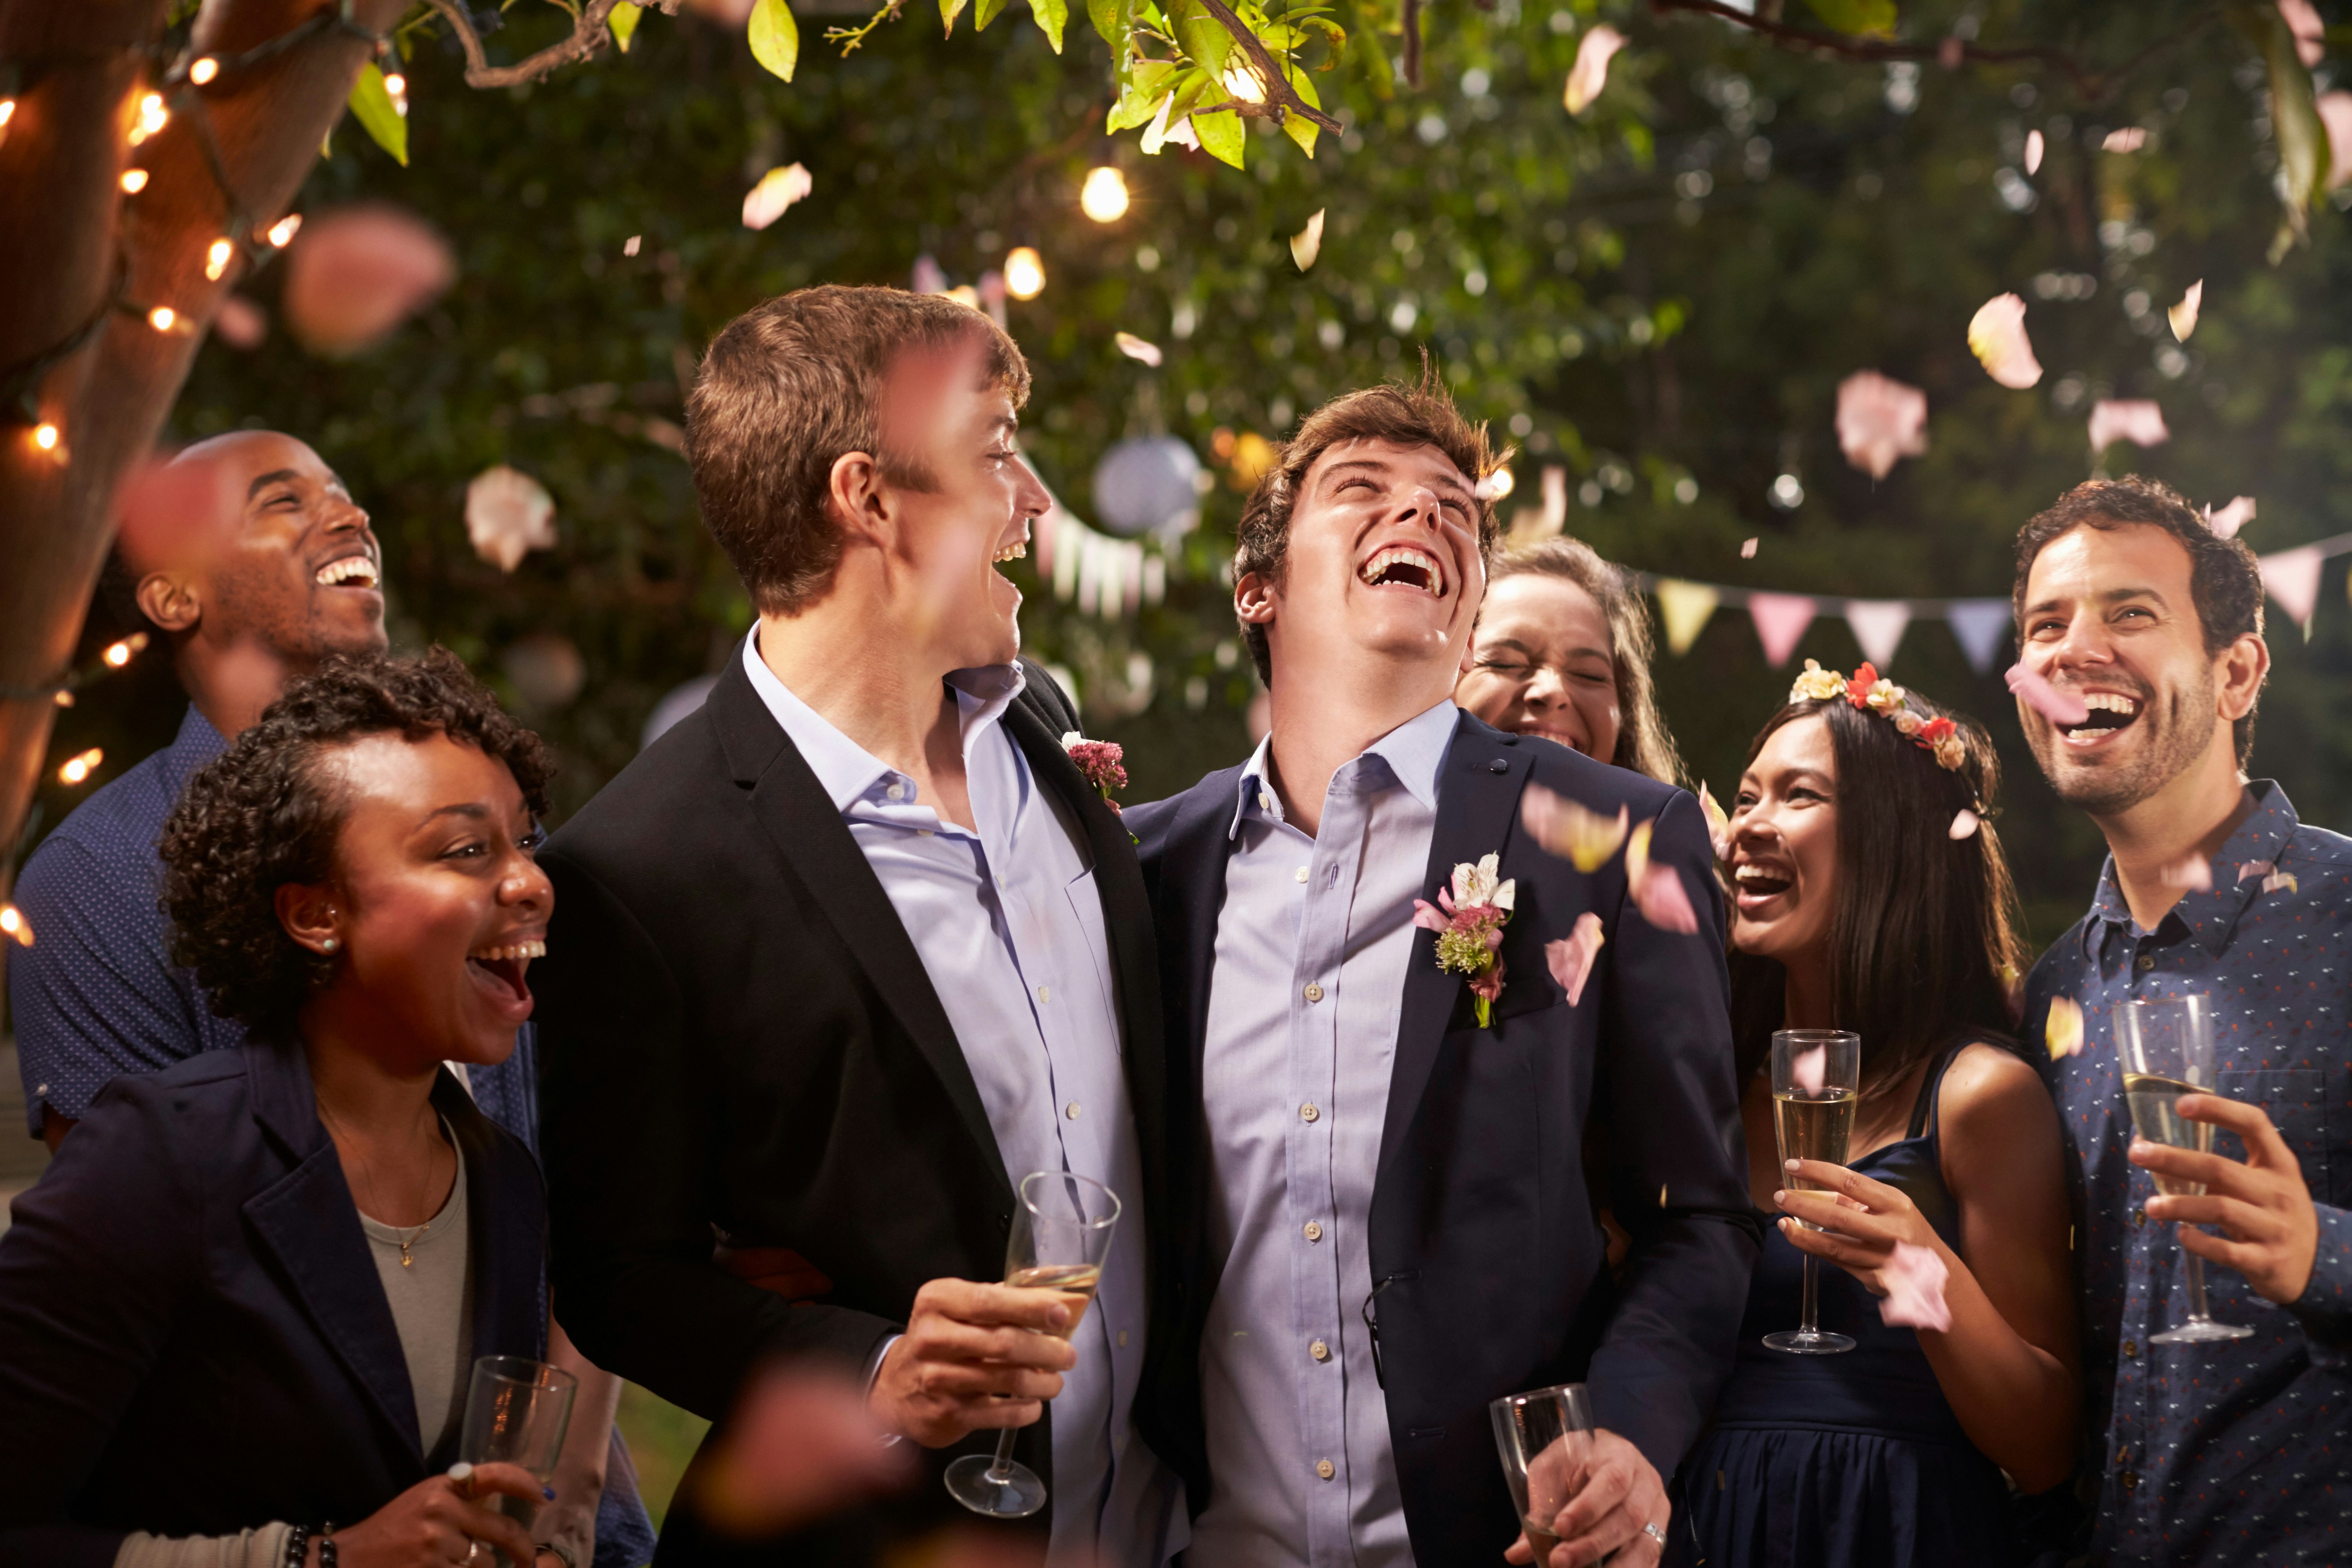 Two men standing under confetti, celebrating their marriage at a wedding reception surrounded by loved ones.